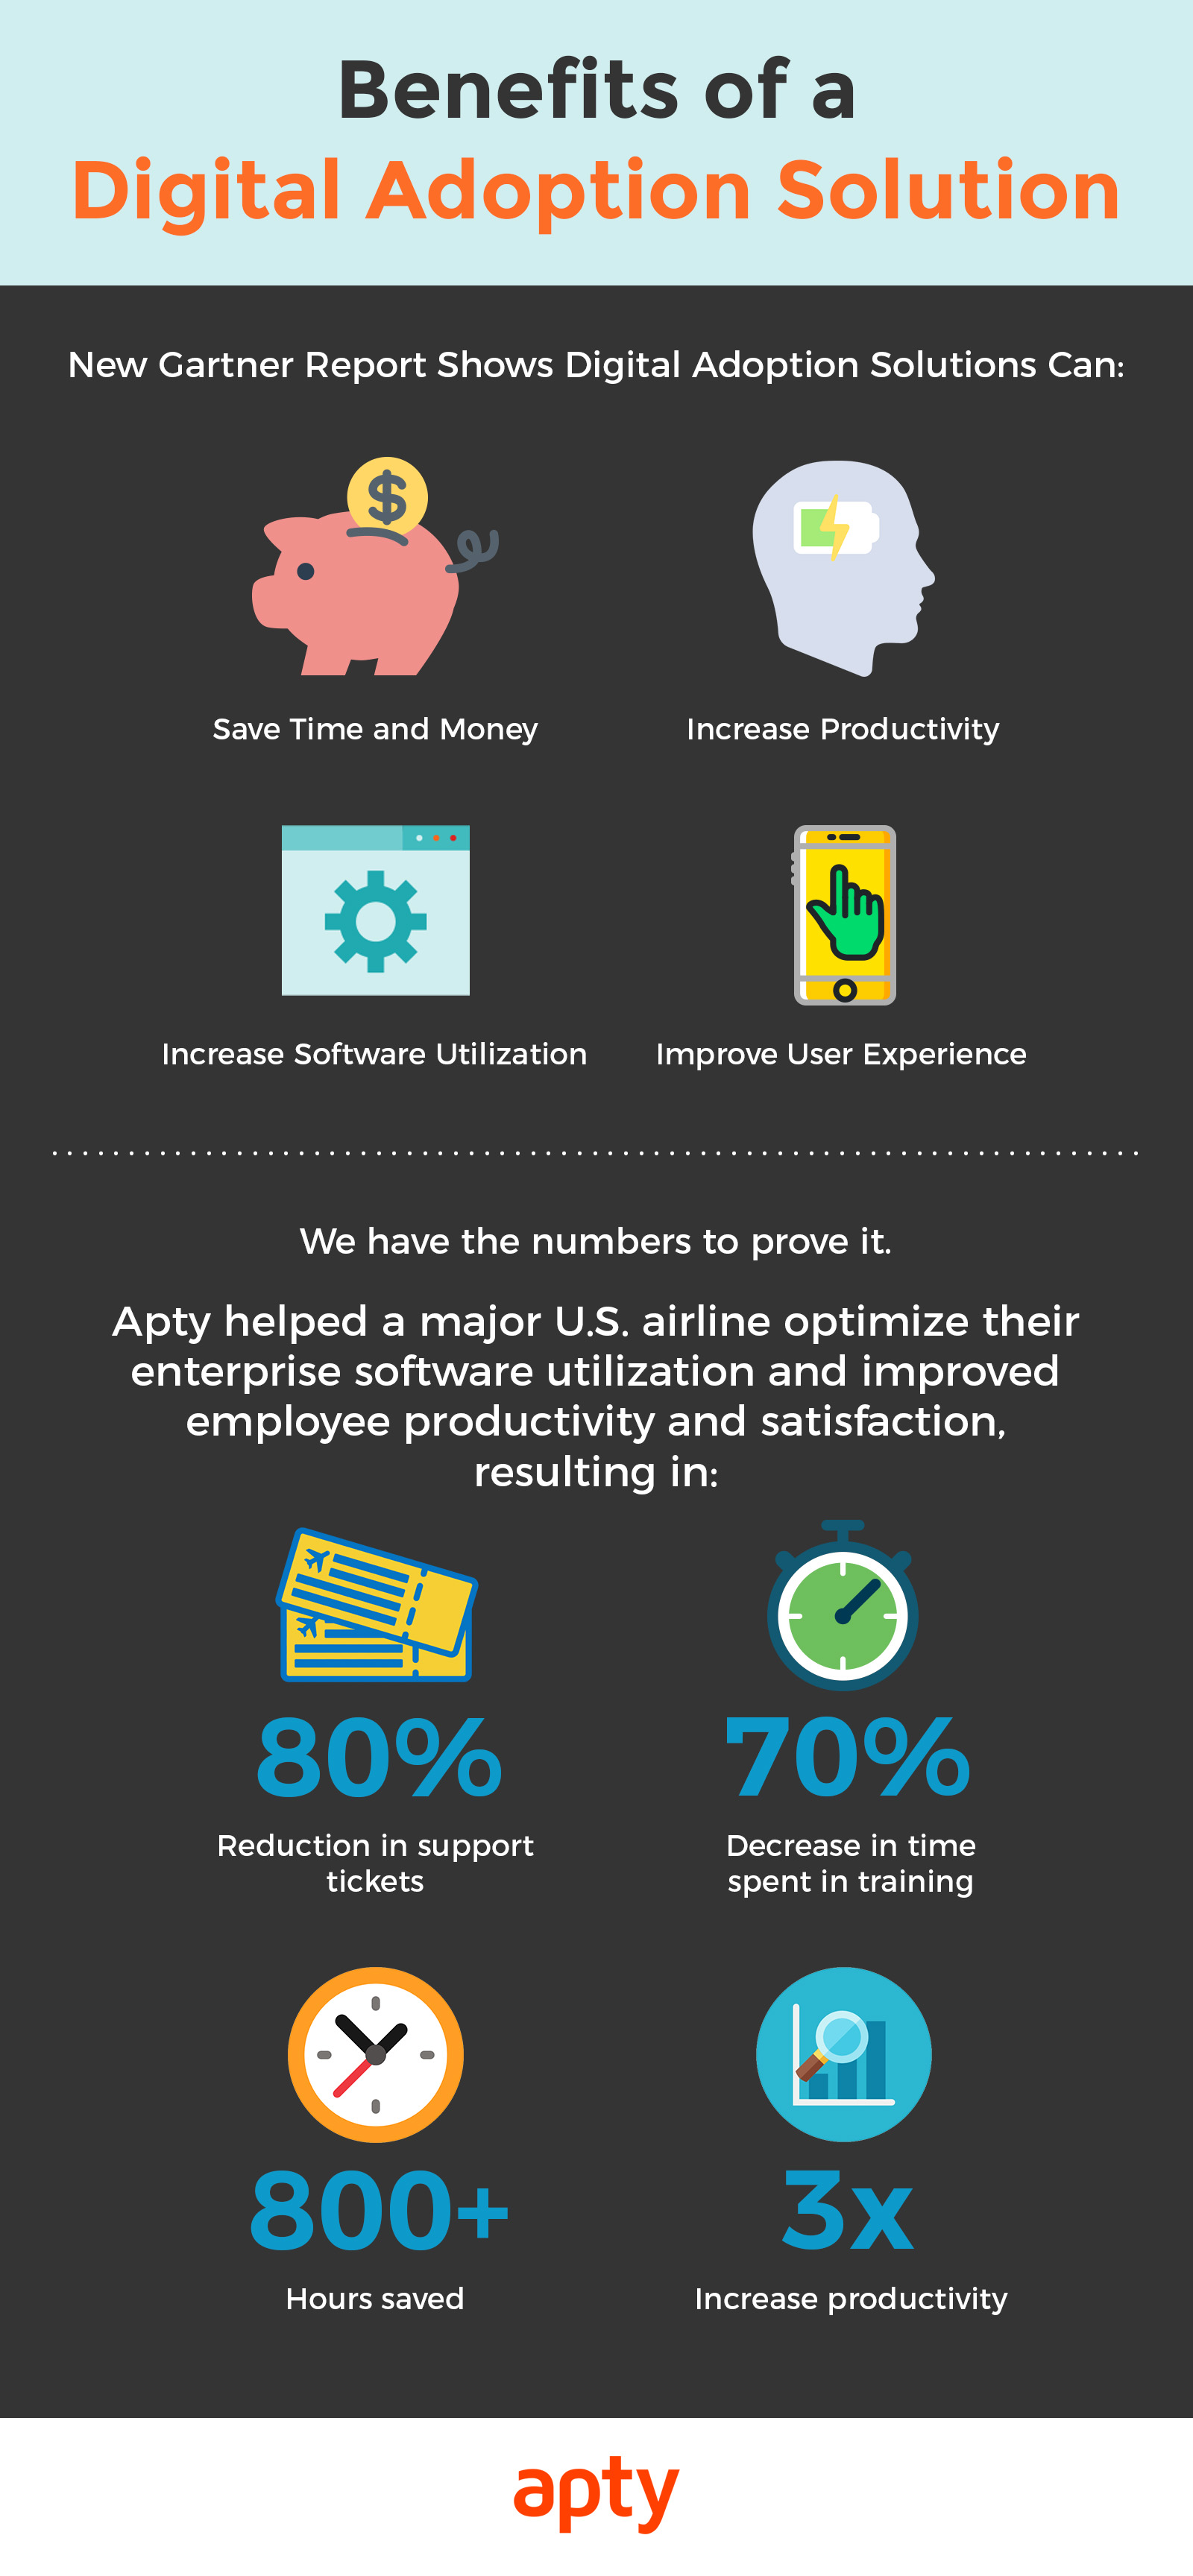 Benefits of a Digital Adoption Solution infographic 2